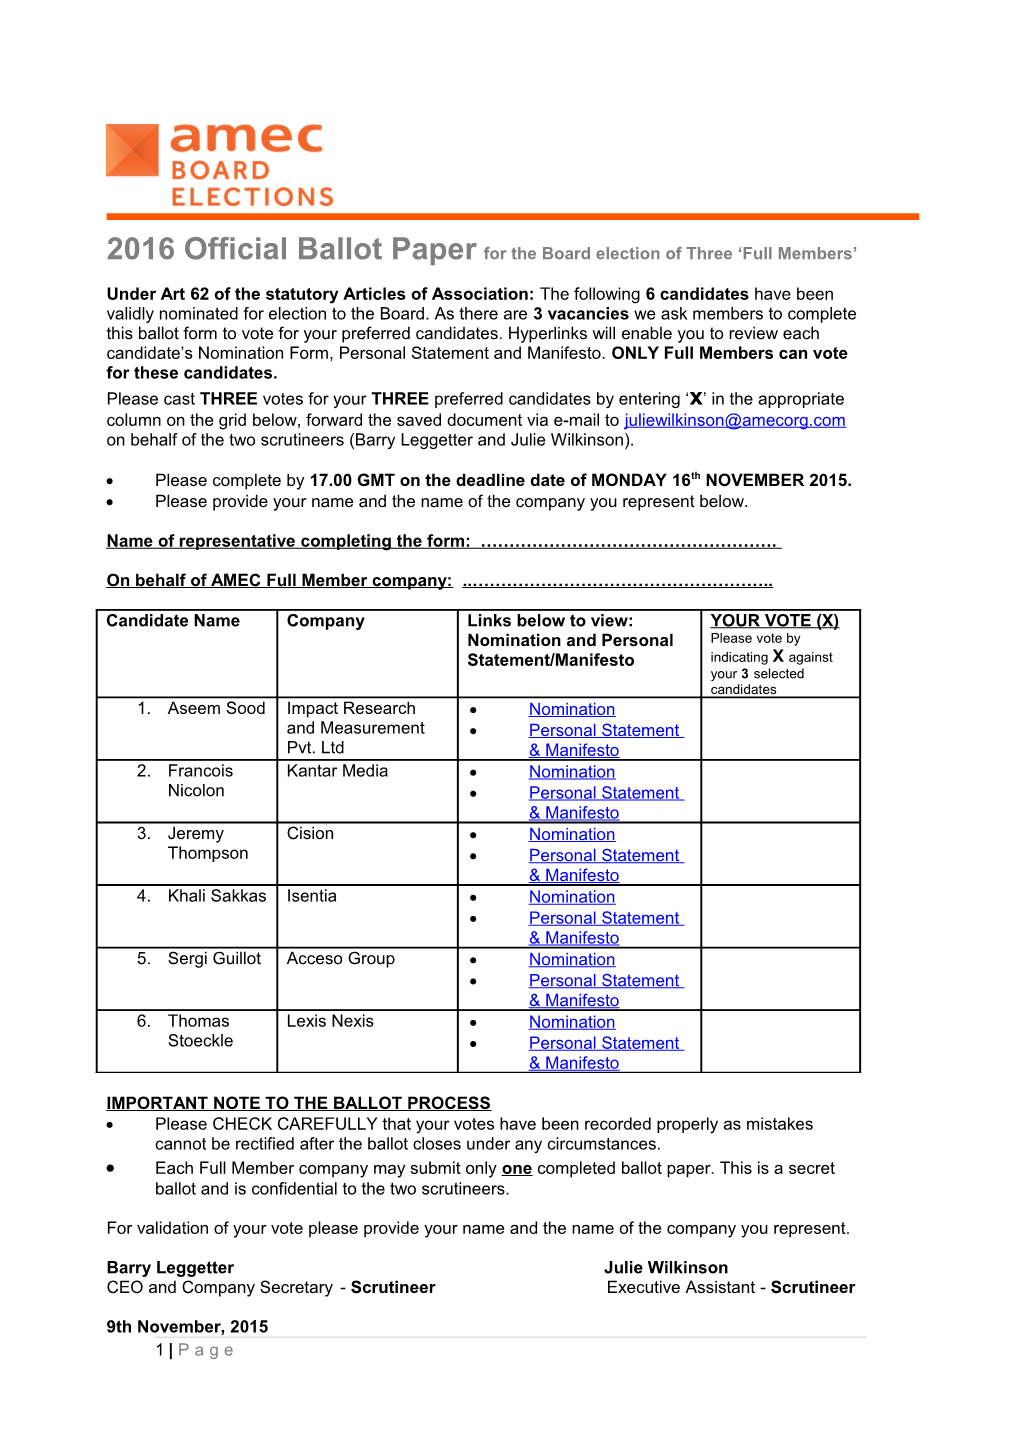 2016 Official Ballot Paper for the Board Election of Three Full Members